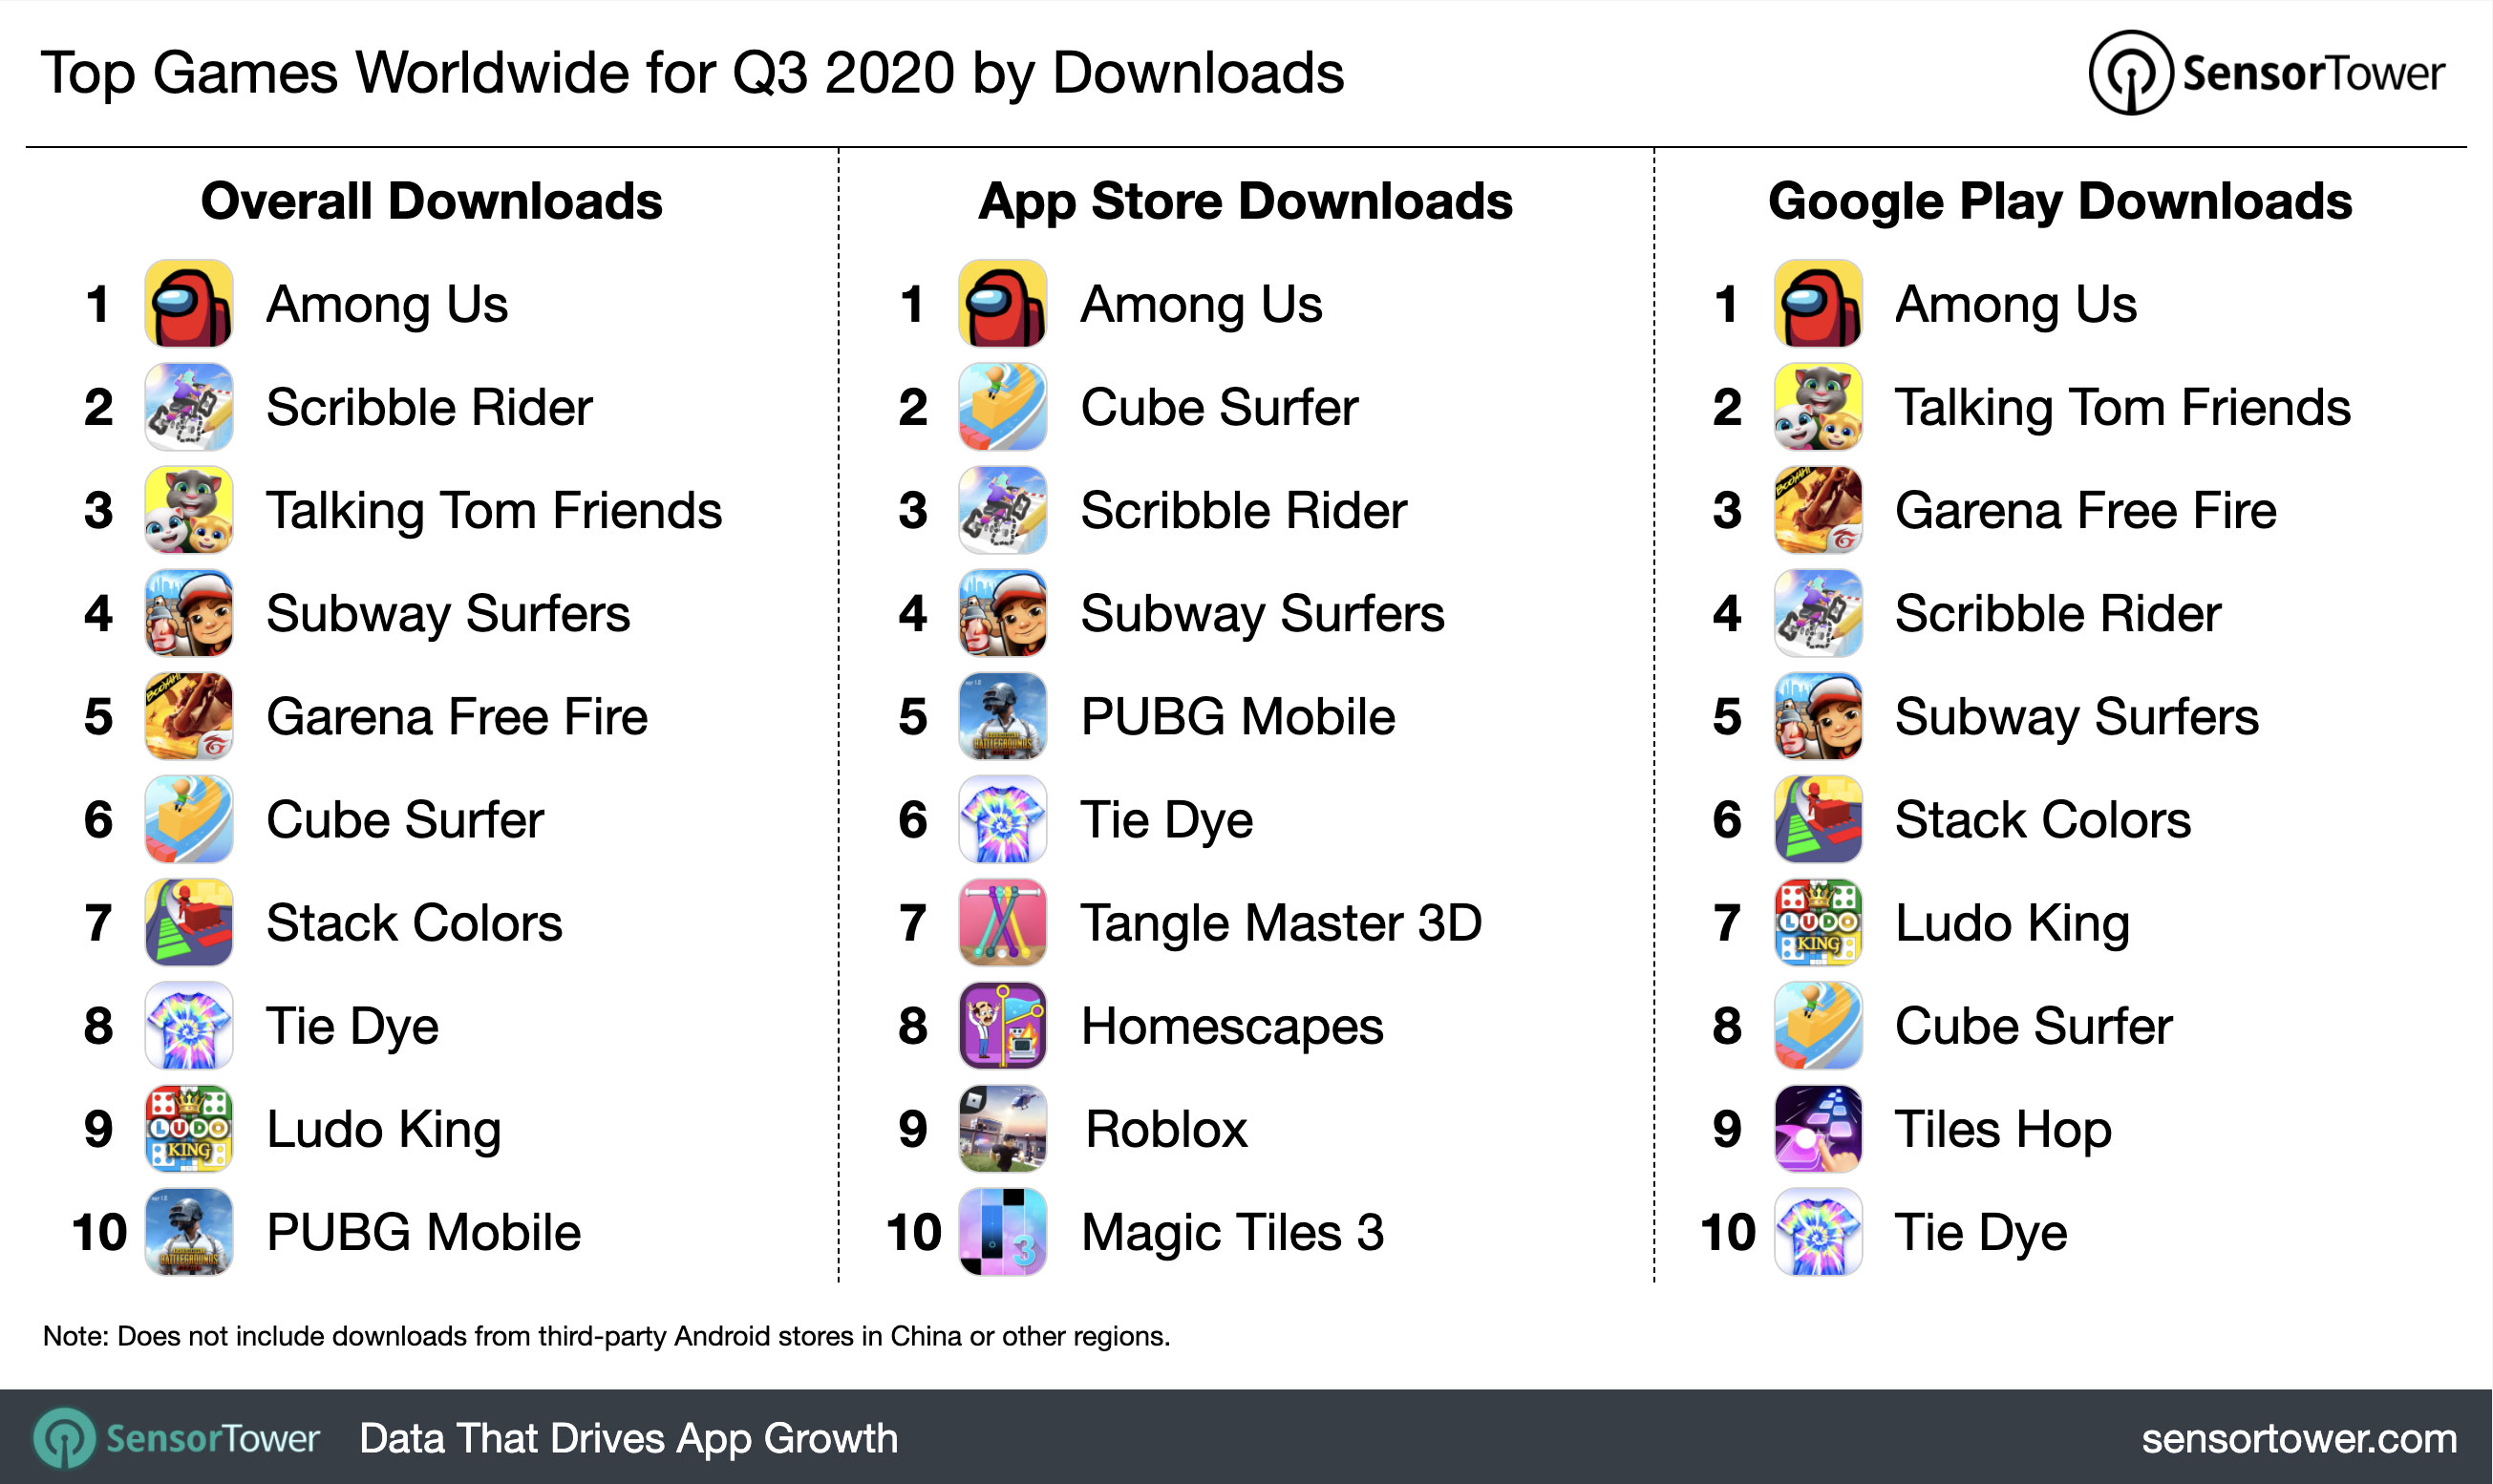 Q3 2020 Most Downloaded Games Worldwide